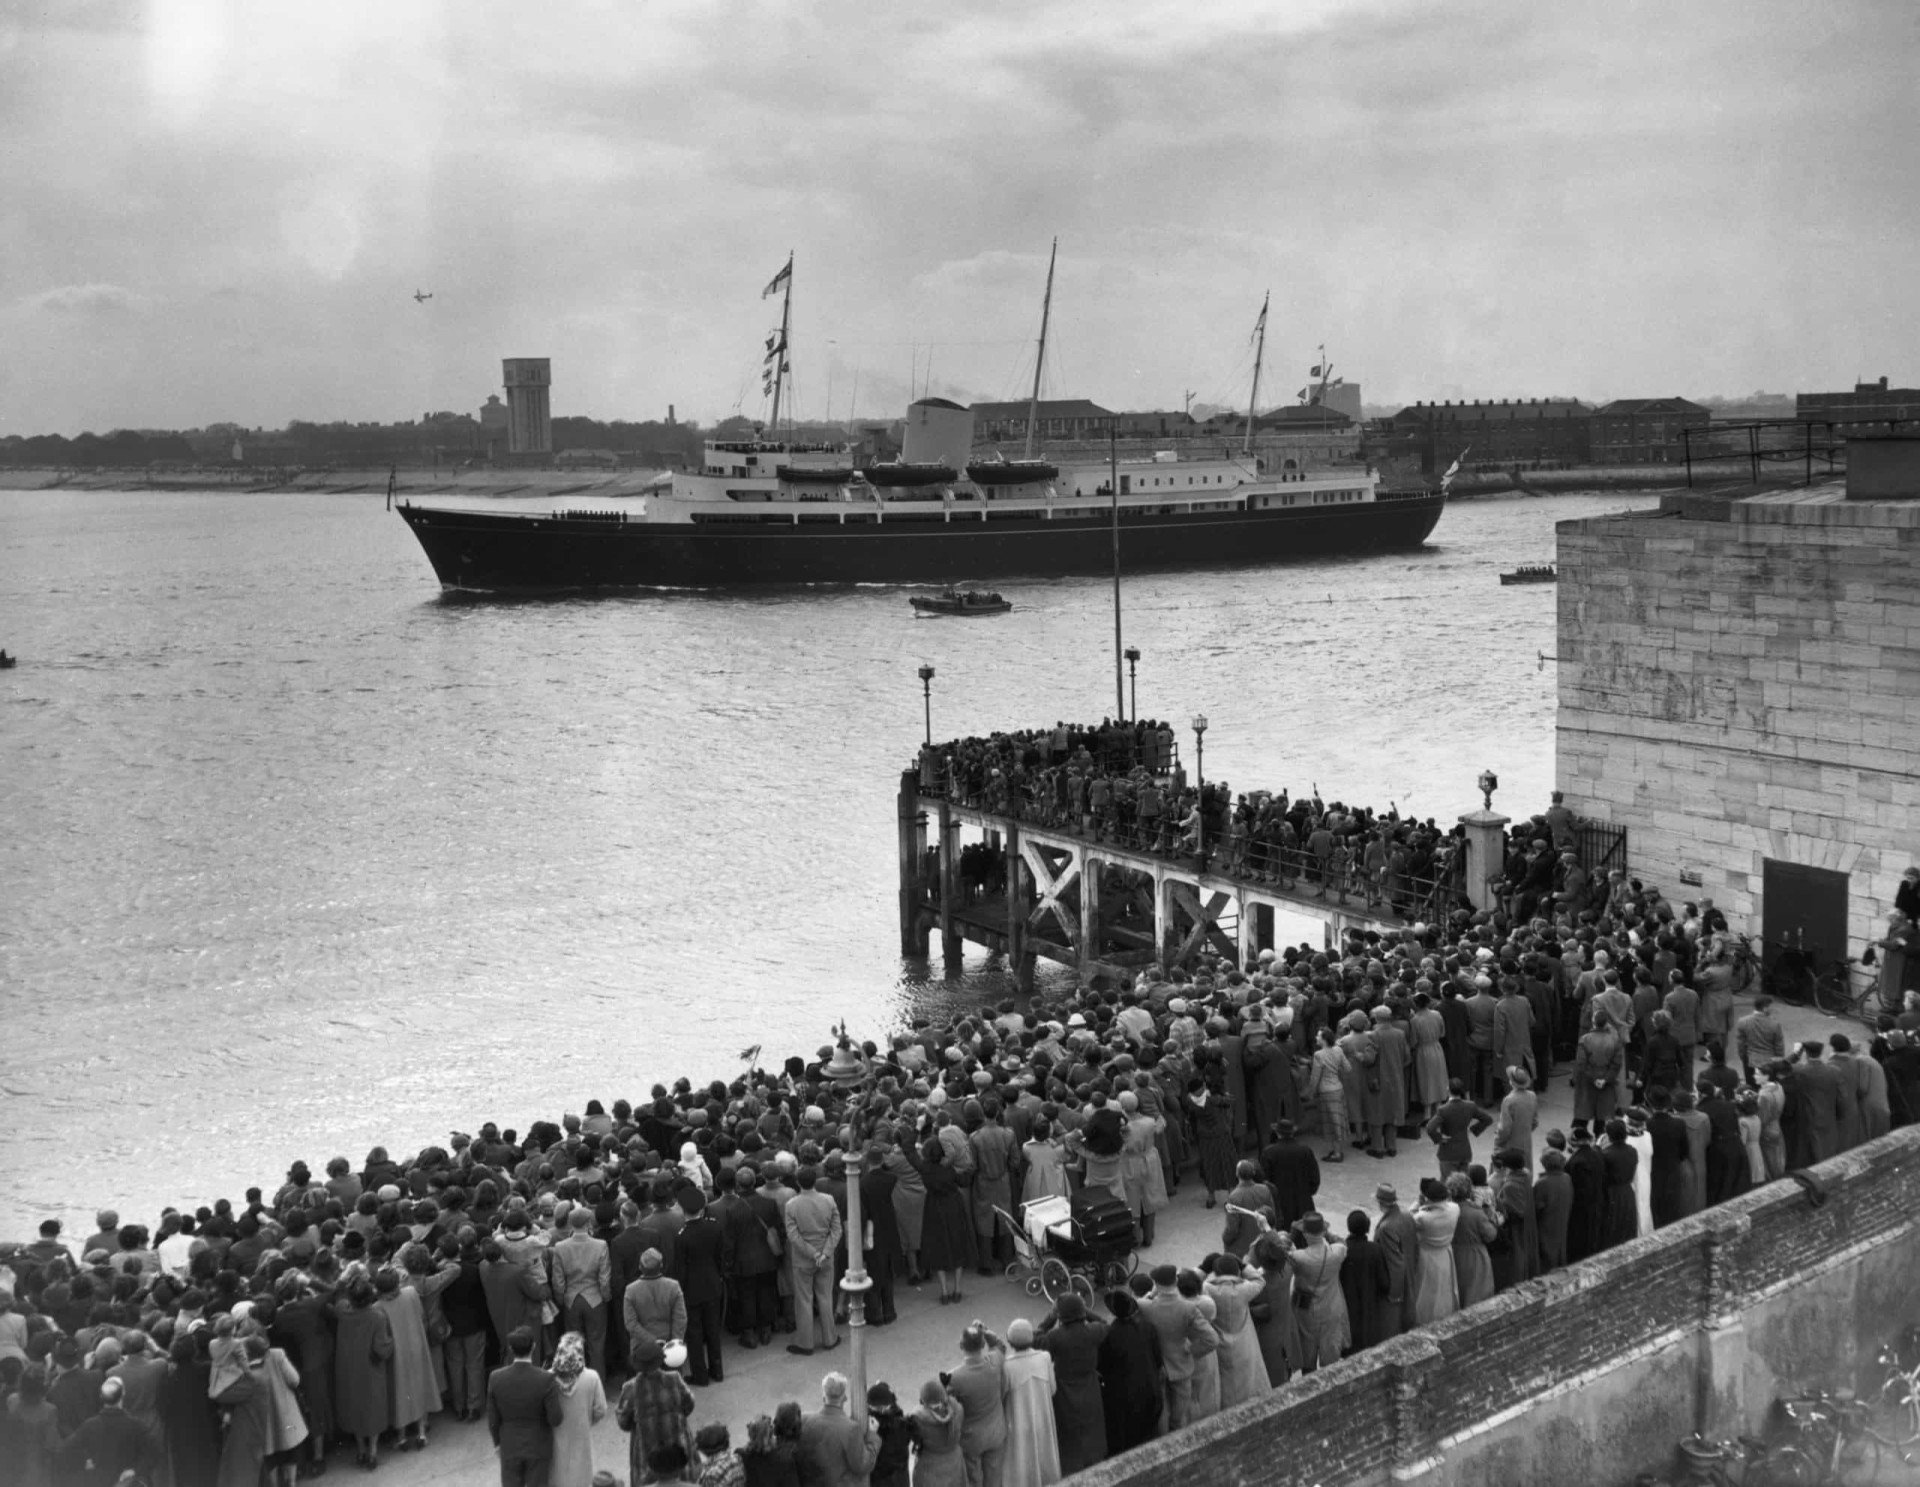 <p>A crowd gathers to bid the Royal Yacht <em>Britannia</em> farewell upon her departure from Portsmouth, England, on April 14, 1954 on her maiden voyage to Malta. The vessel was ultimately bound for Tobruk, in Libya.</p><p><a href="https://www.msn.com/en-us/community/channel/vid-7xx8mnucu55yw63we9va2gwr7uihbxwc68fxqp25x6tg4ftibpra?cvid=94631541bc0f4f89bfd59158d696ad7e">Follow us and access great exclusive content every day</a></p>